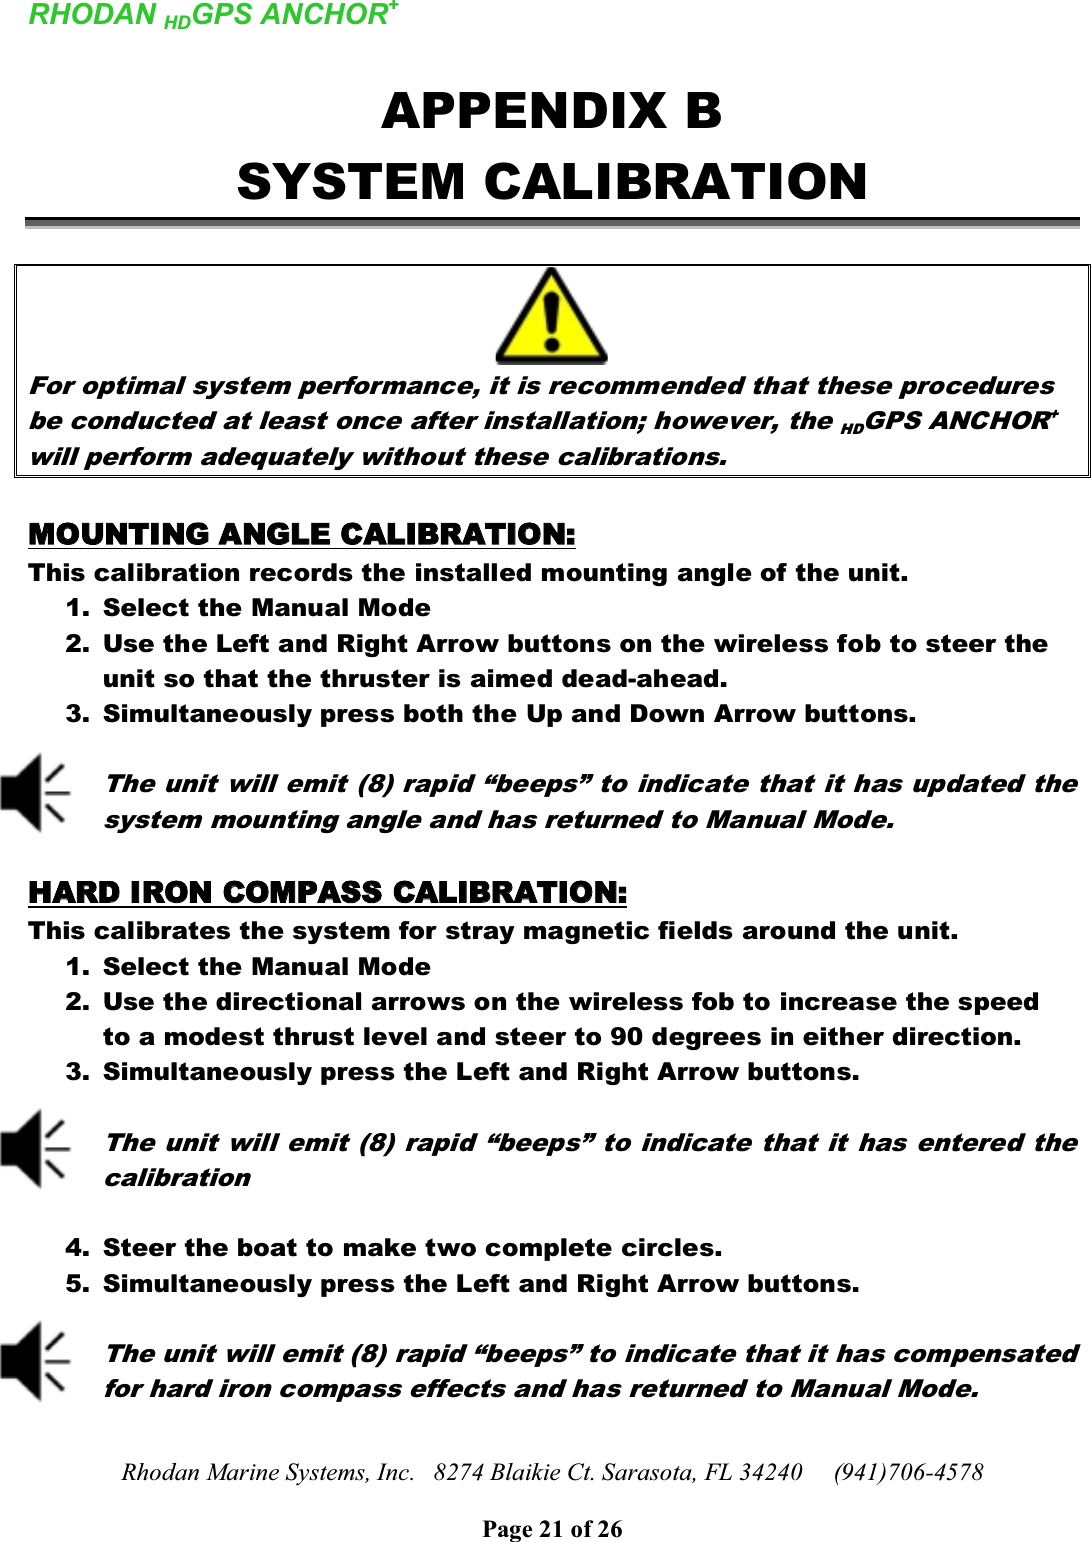 RHODAN HDGPS ANCHOR+Rhodan Marine Systems, Inc.   8274 Blaikie Ct. Sarasota, FL 34240     (941)706-4578Page 21 of 26APPENDIX BSYSTEM CALIBRATIONFor optimal system performance, it is recommended that these procedures be conducted at least once after installation; however, the HDGPS ANCHOR+will perform adequately without these calibrations. MMOOUUNNTTIINNGG  AANNGGLLEE  CCAALLIIBBRRAATTIIOONN::This calibration records the installed mounting angle of the unit. 1. Select the Manual Mode2. Use the Left and Right Arrow buttons on the wireless fob to steer the unit so that the thruster is aimed dead-ahead. 3. Simultaneously press both the Up and Down Arrow buttons.The unit will emit (8) rapid “beeps” to indicate that it has updated the system mounting angle and has returned to Manual Mode.HHAARRDD  IIRROONN  CCOOMMPPAASSSS  CCAALLIIBBRRAATTIIOONN::This calibrates the system for stray magnetic fields around the unit.1. Select the Manual Mode2. Use the directional arrows on the wireless fob to increase the speed to a modest thrust level and steer to 90 degrees in either direction.3. Simultaneously press the Left and Right Arrow buttons.The unit will emit (8) rapid “beeps” to indicate that it has entered the calibration4. Steer the boat to make two complete circles.5. Simultaneously press the Left and Right Arrow buttons.The unit will emit (8) rapid “beeps” to indicate that it has compensated for hard iron compass effects and has returned to Manual Mode.